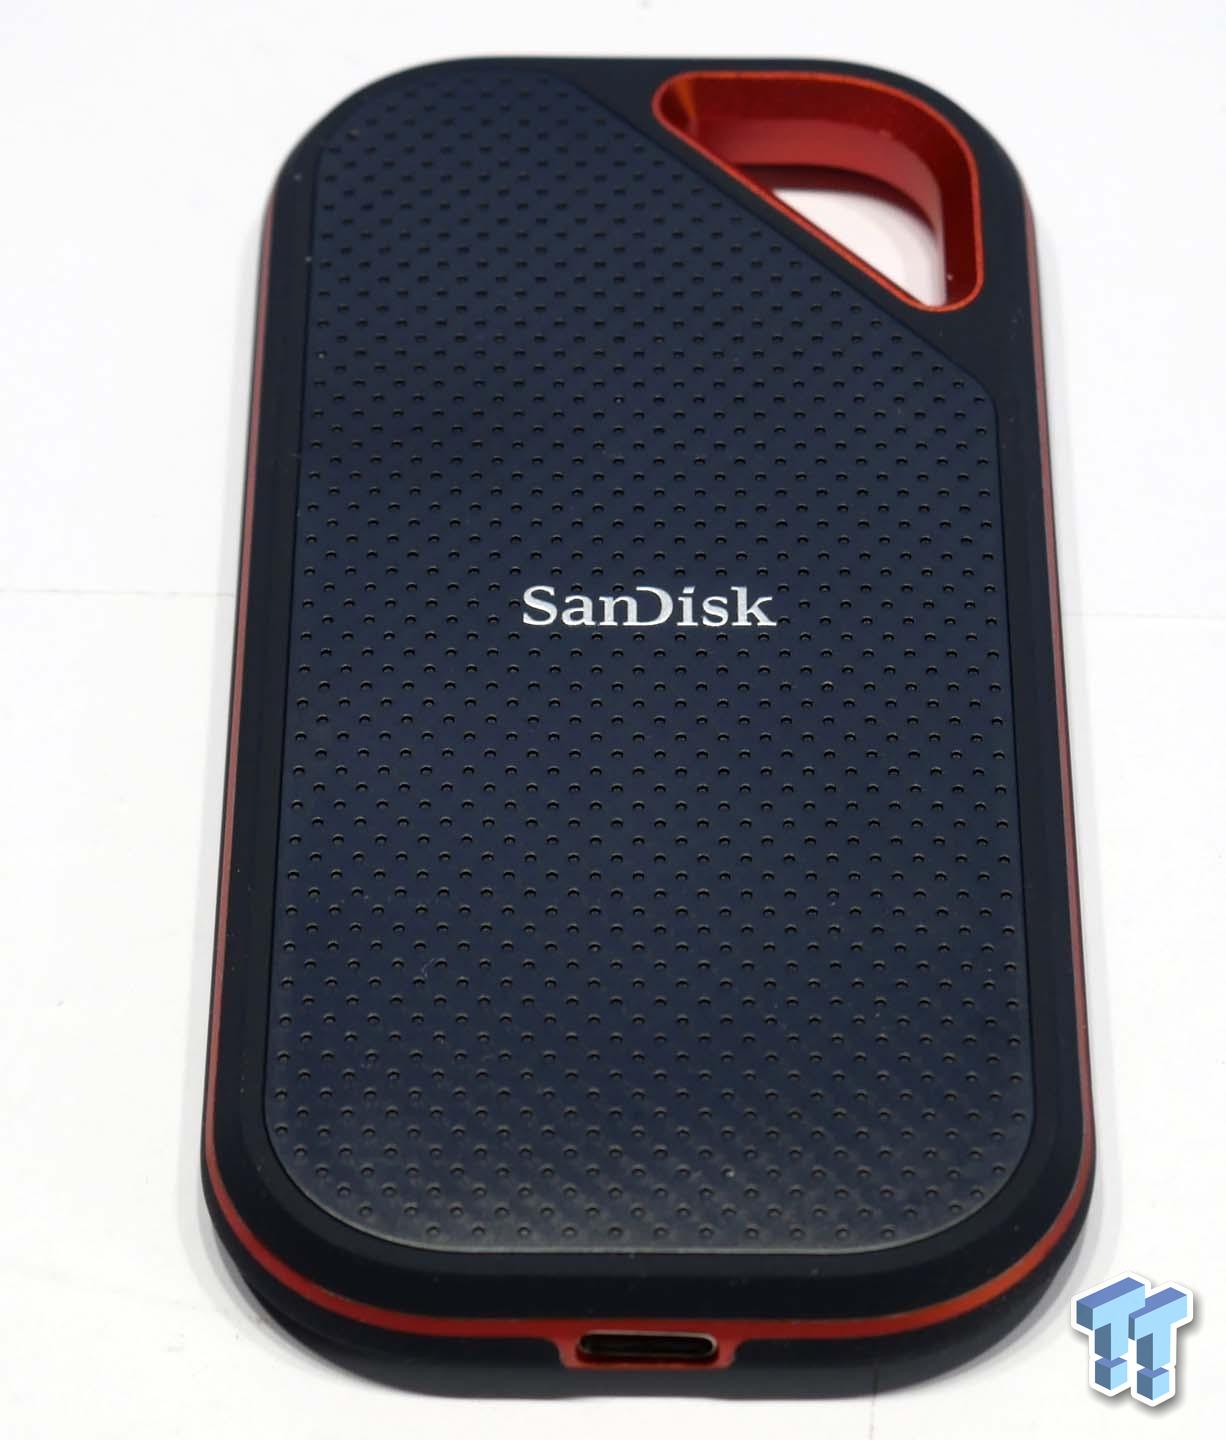 SanDisk Extreme Pro Portable SSD review: Fast, tough and reasonably priced